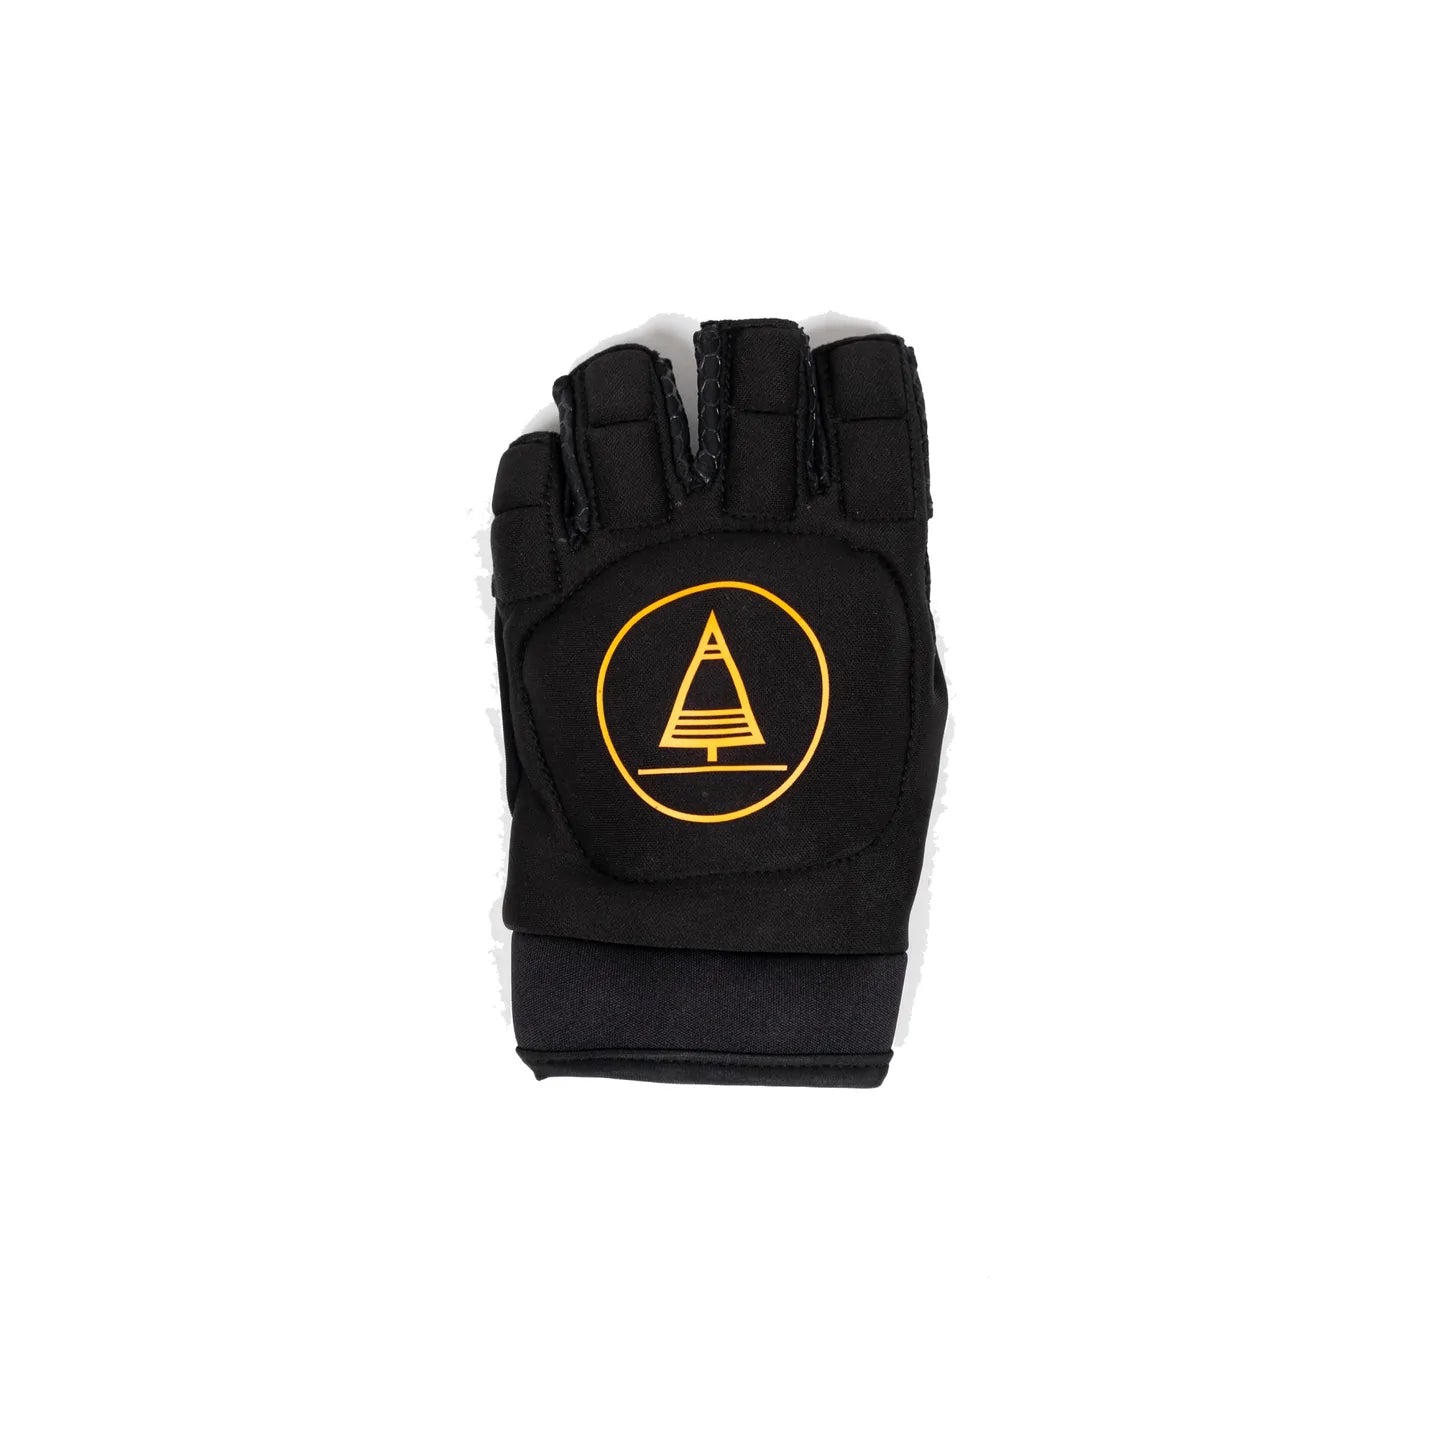 Oregon Authentic Outdoor Gloves